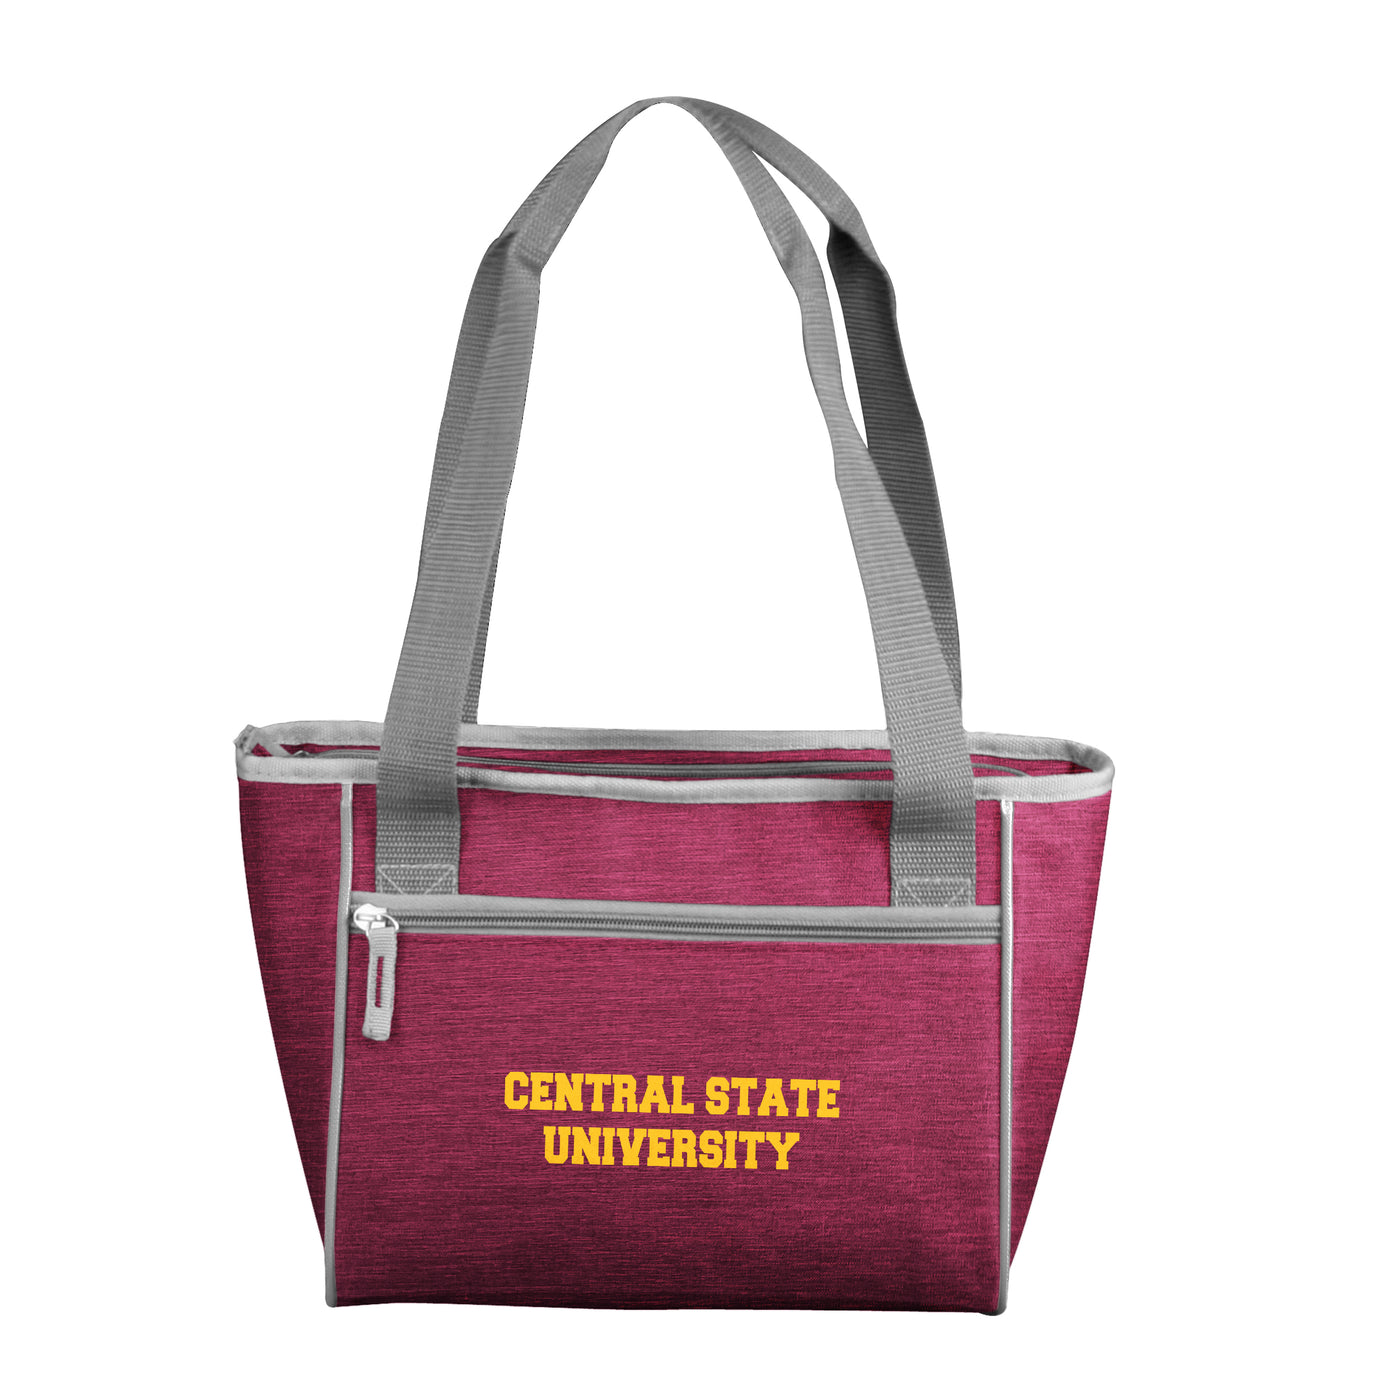 Central State University 16 Can Cooler Tote